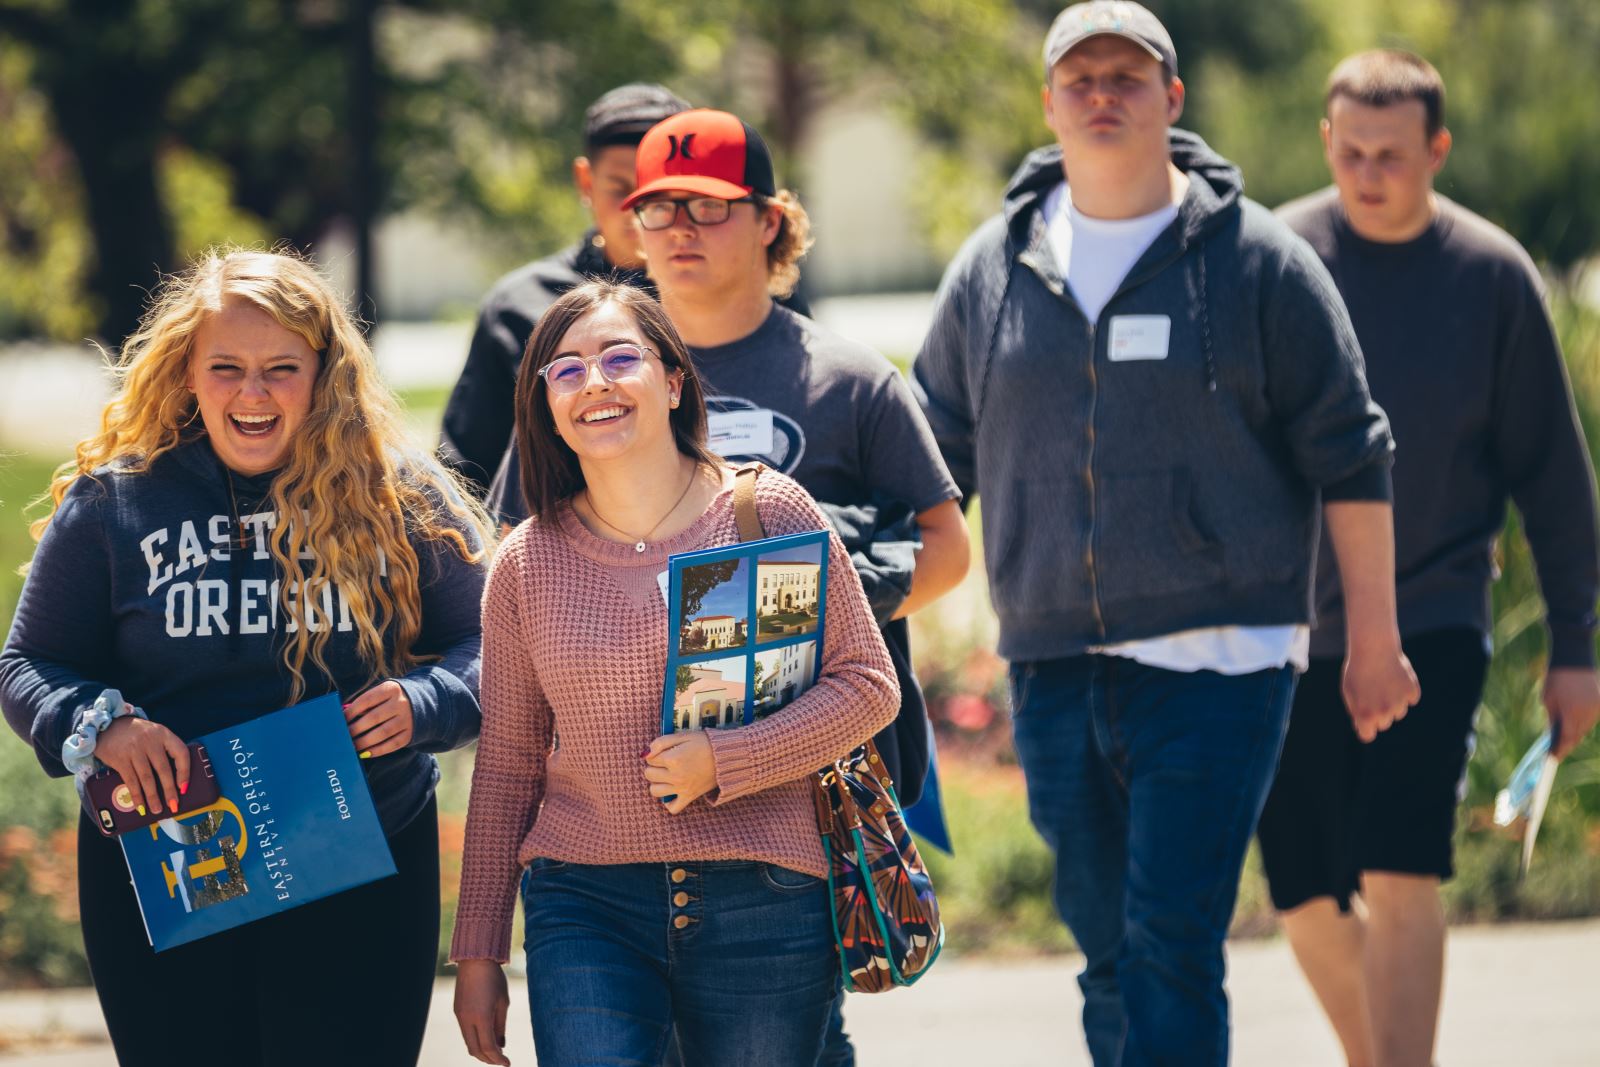 Students on a campus tour at EOU.